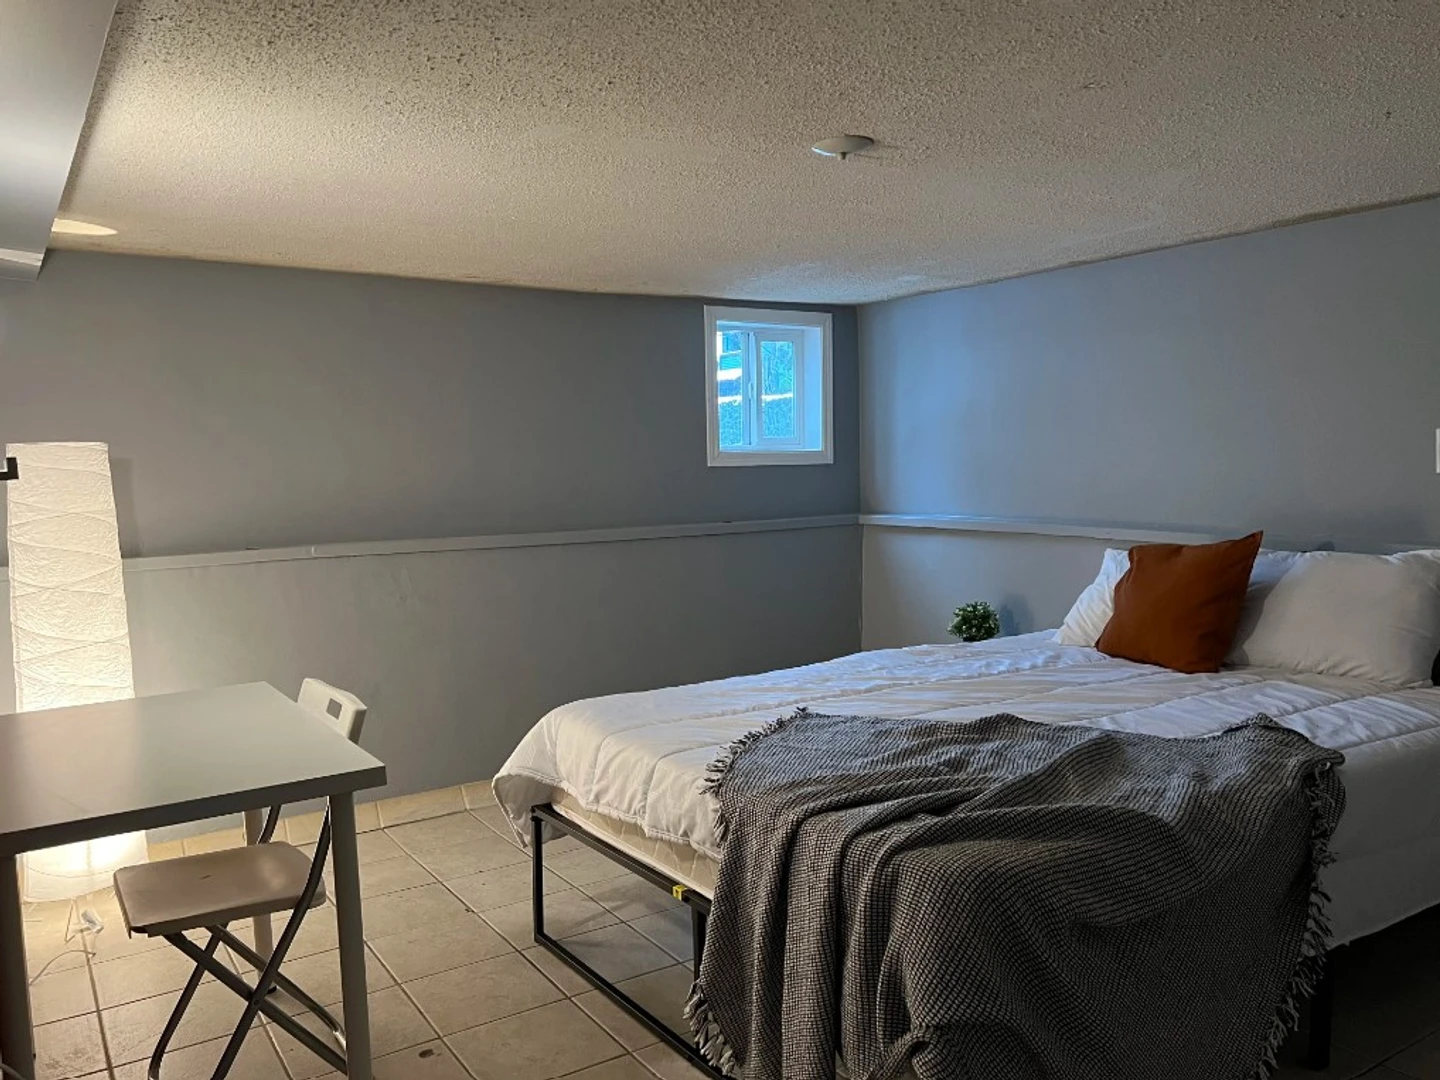 Cheap private room in Vancouver